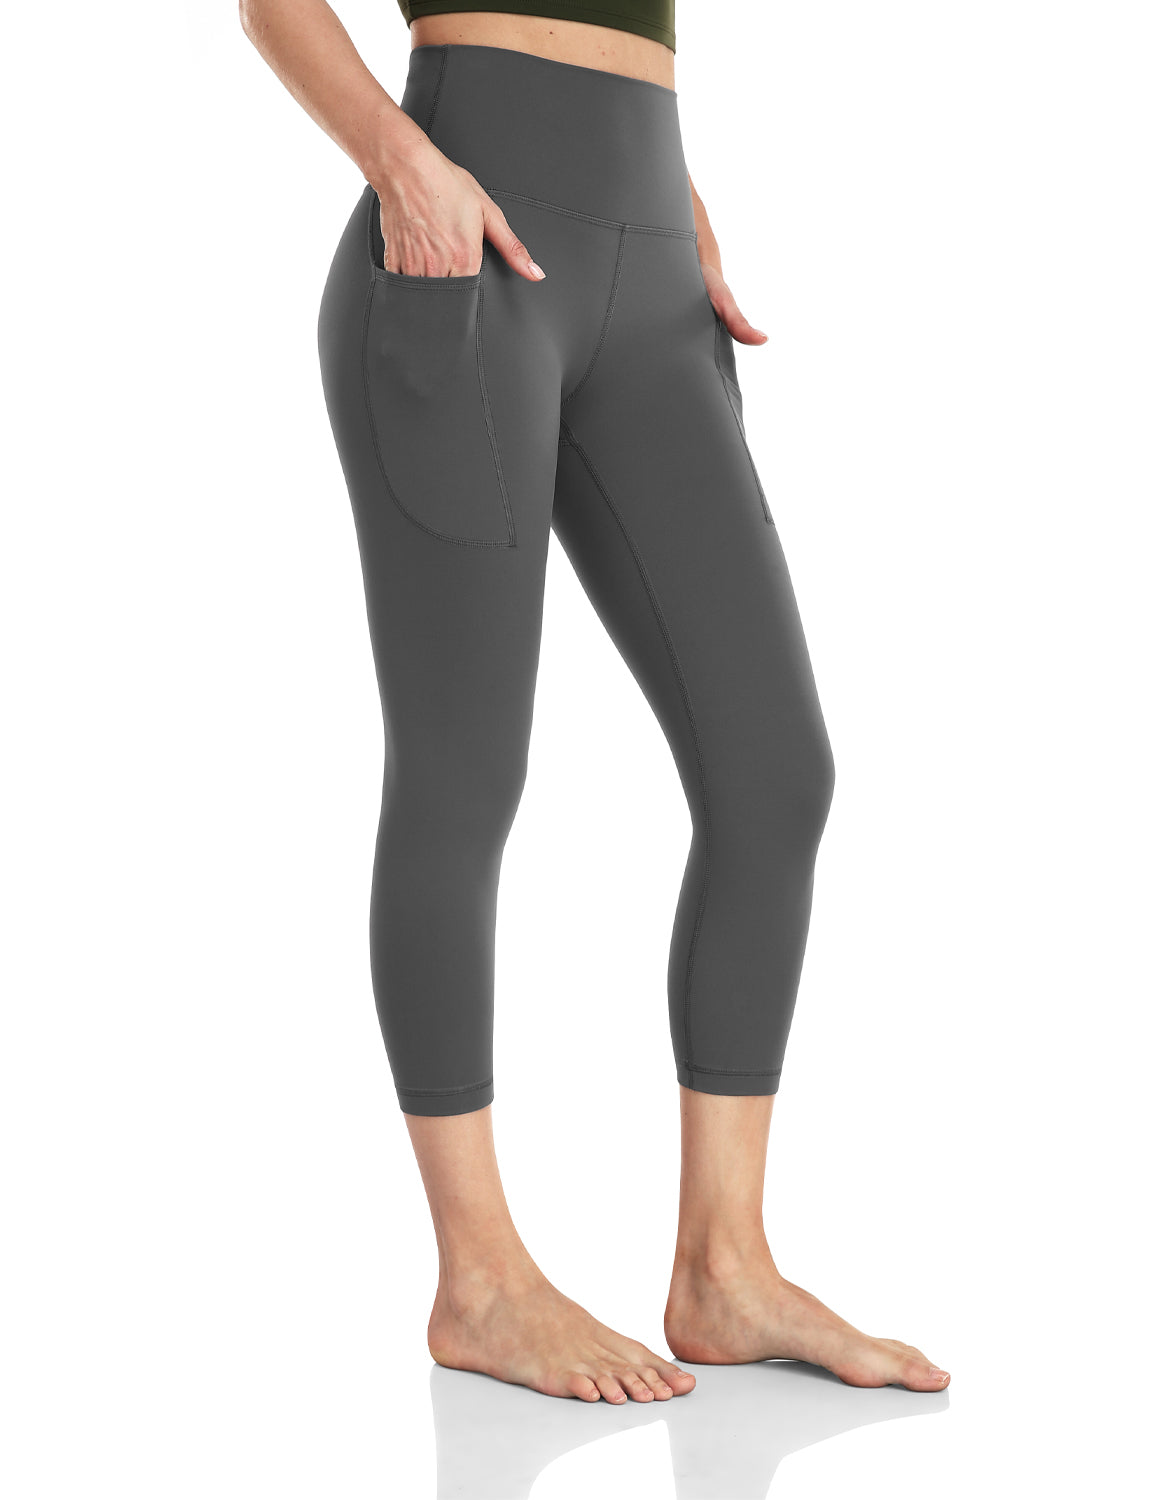 21 FeatherFit™ Capris Yoga Leggings Buttery Soft Non See-Through Tummy  Control Gym Tights With Hidden Pocket at Waist